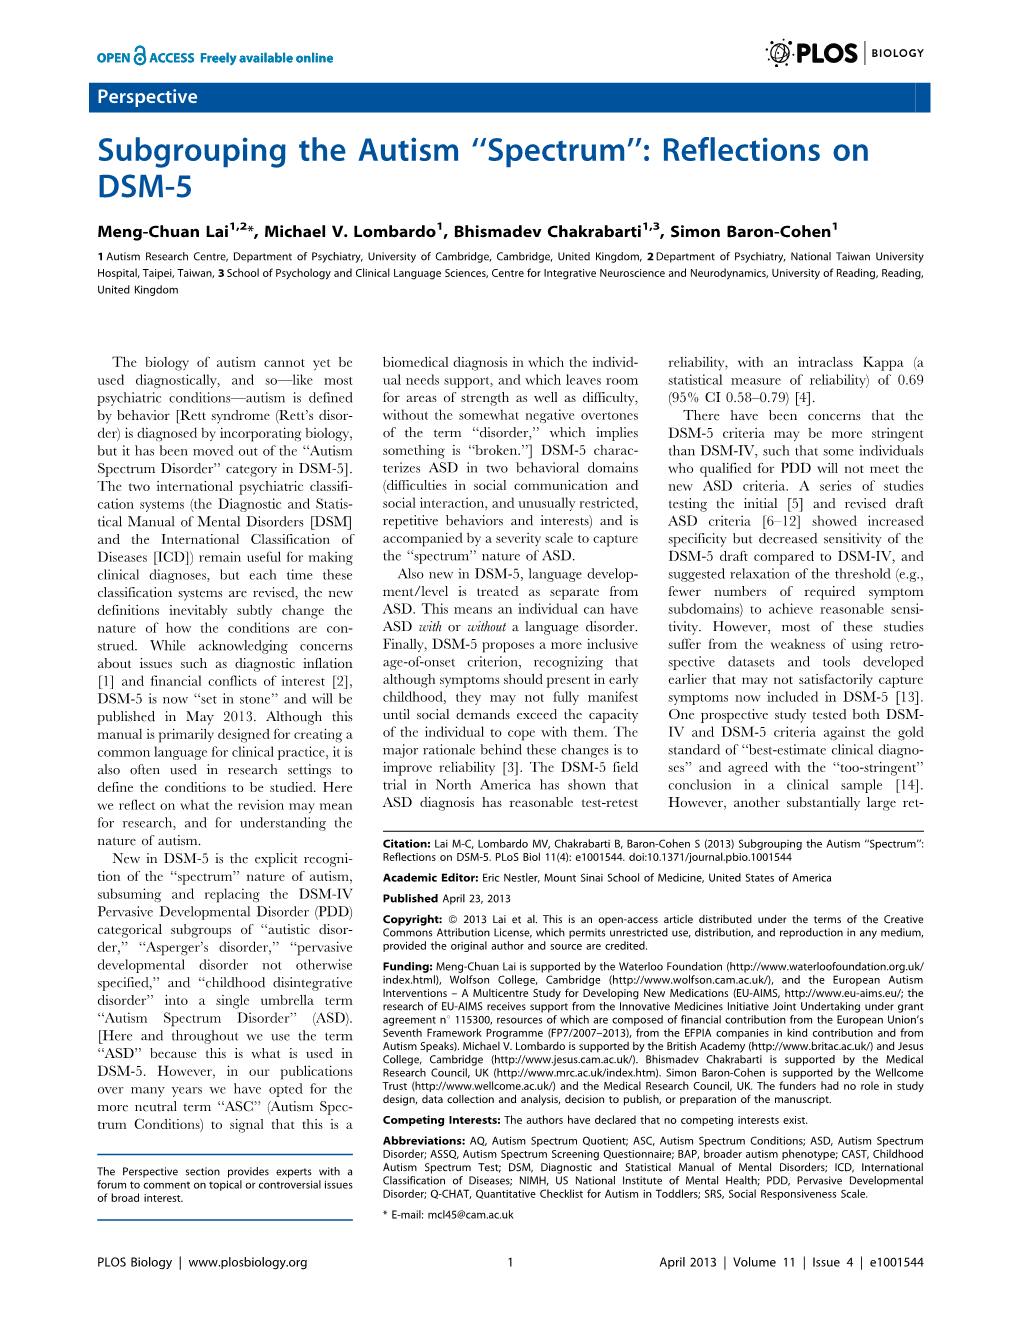 Subgrouping the Autism ''Spectrum'': Reflections on DSM-5